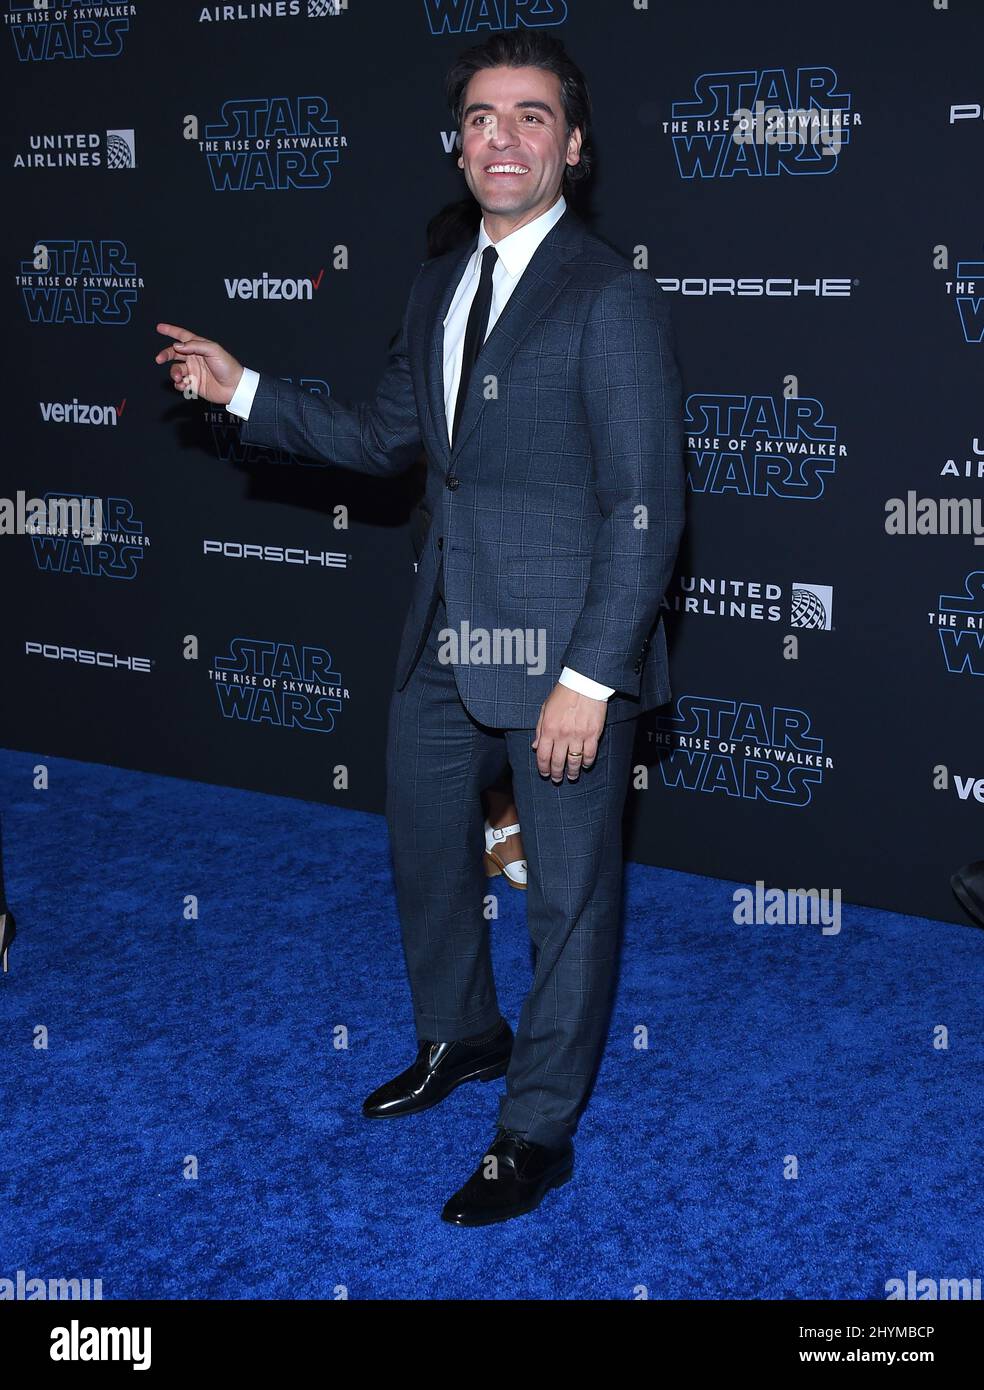 Oscar Isaac attending the World Premiere of Star Wars: The Rise of Skywalker in Los Angeles Stock Photo